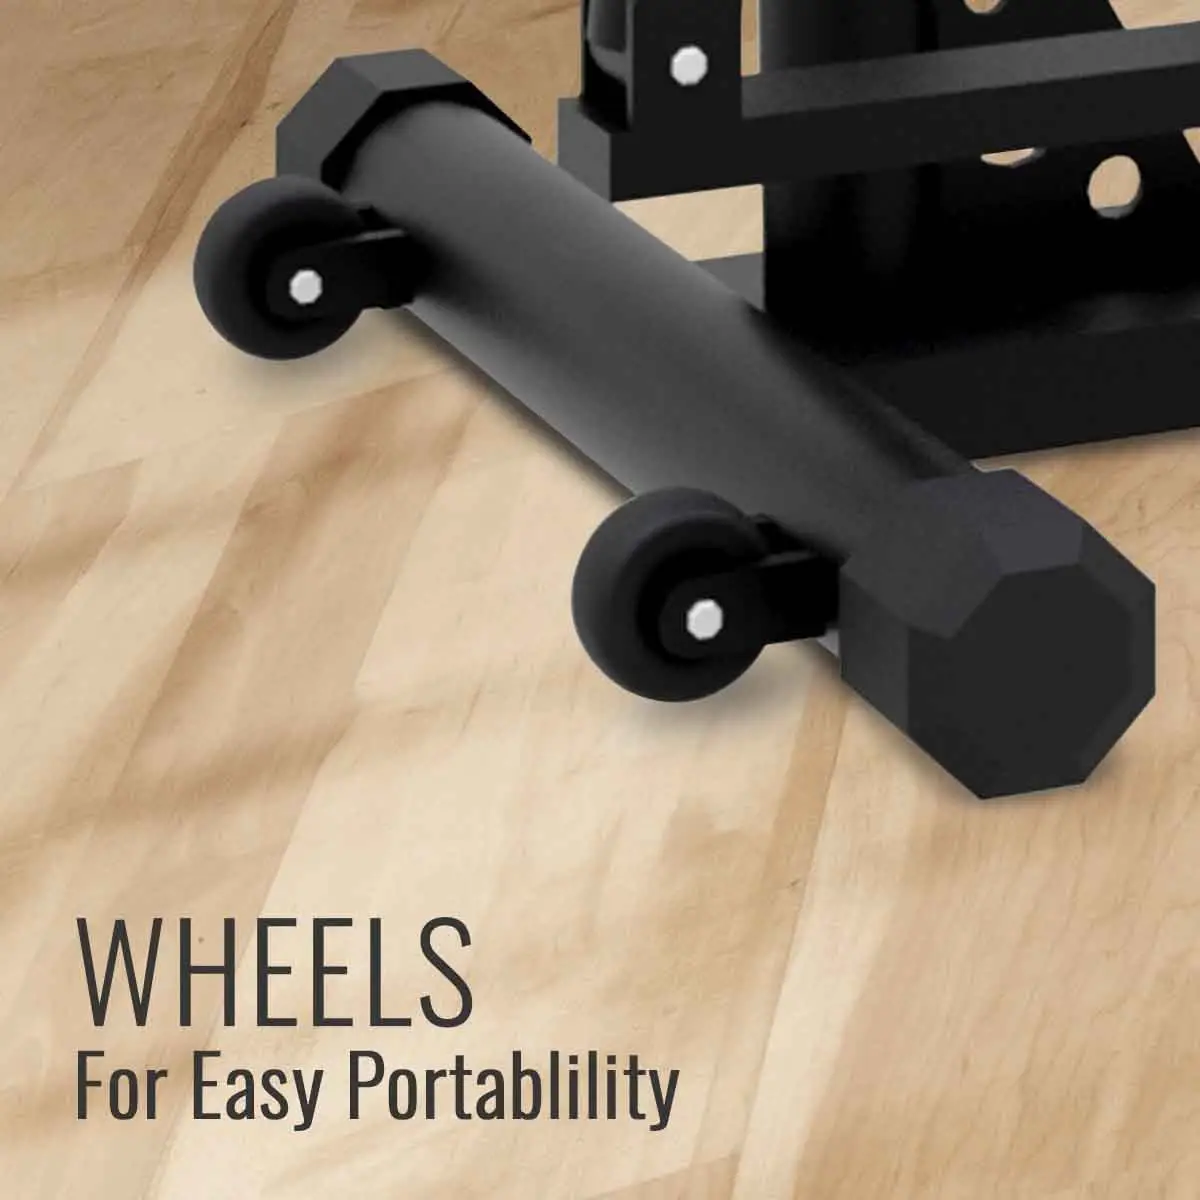 Durafit Cross Trainer EBS02 with Wheels for Easy Portability